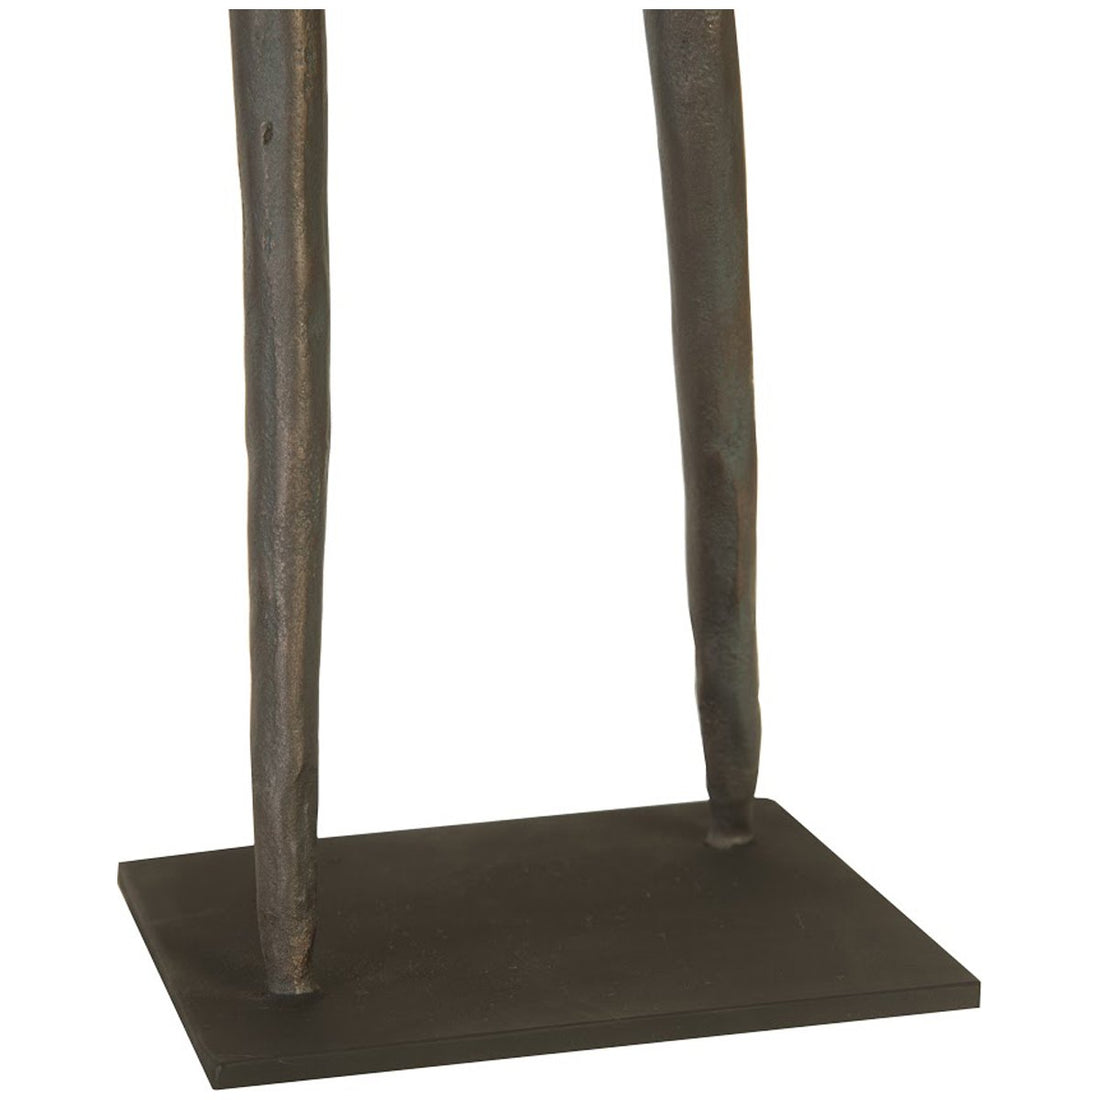 Phillips Collection Abstract Figure Sculpture on Metal Base, Elbow Bent